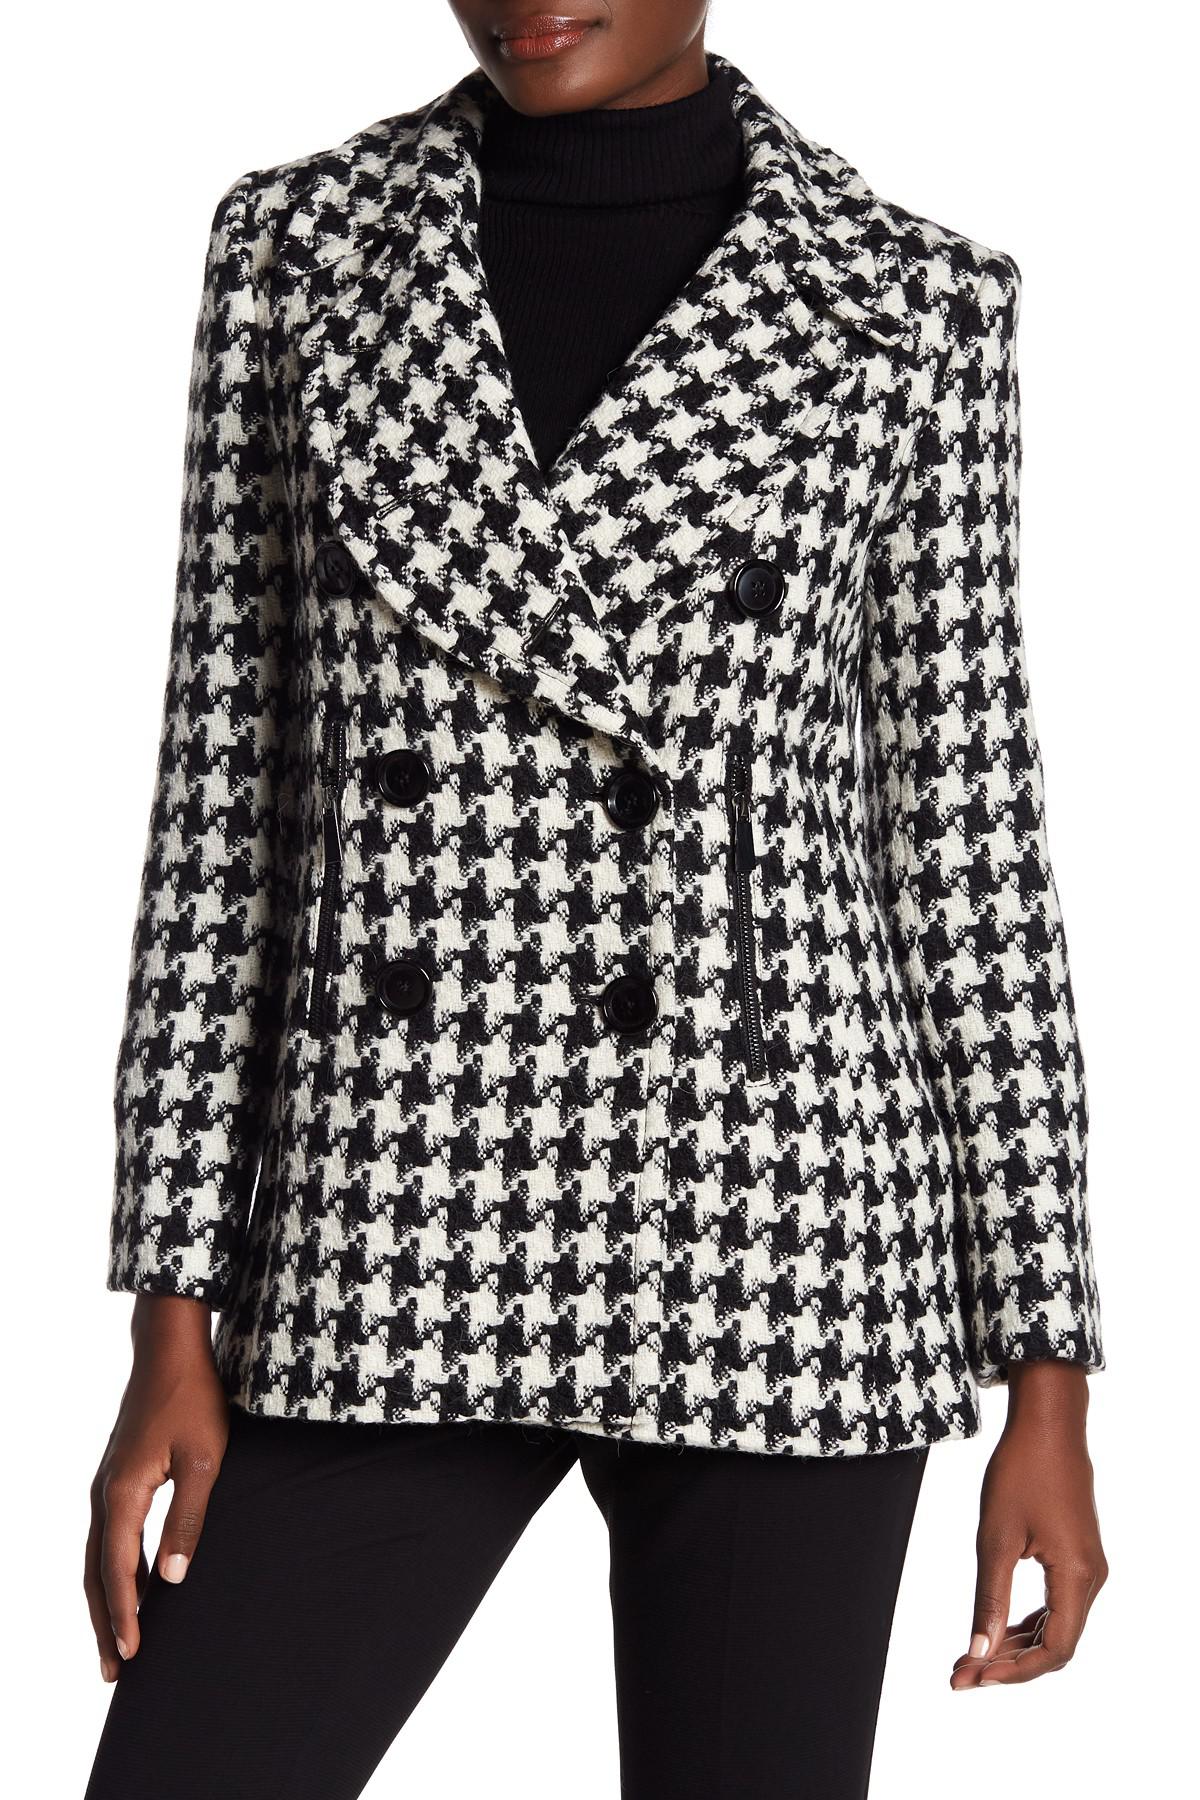 Sofia Cashmere Houndstooth Peacoat in Black | Lyst